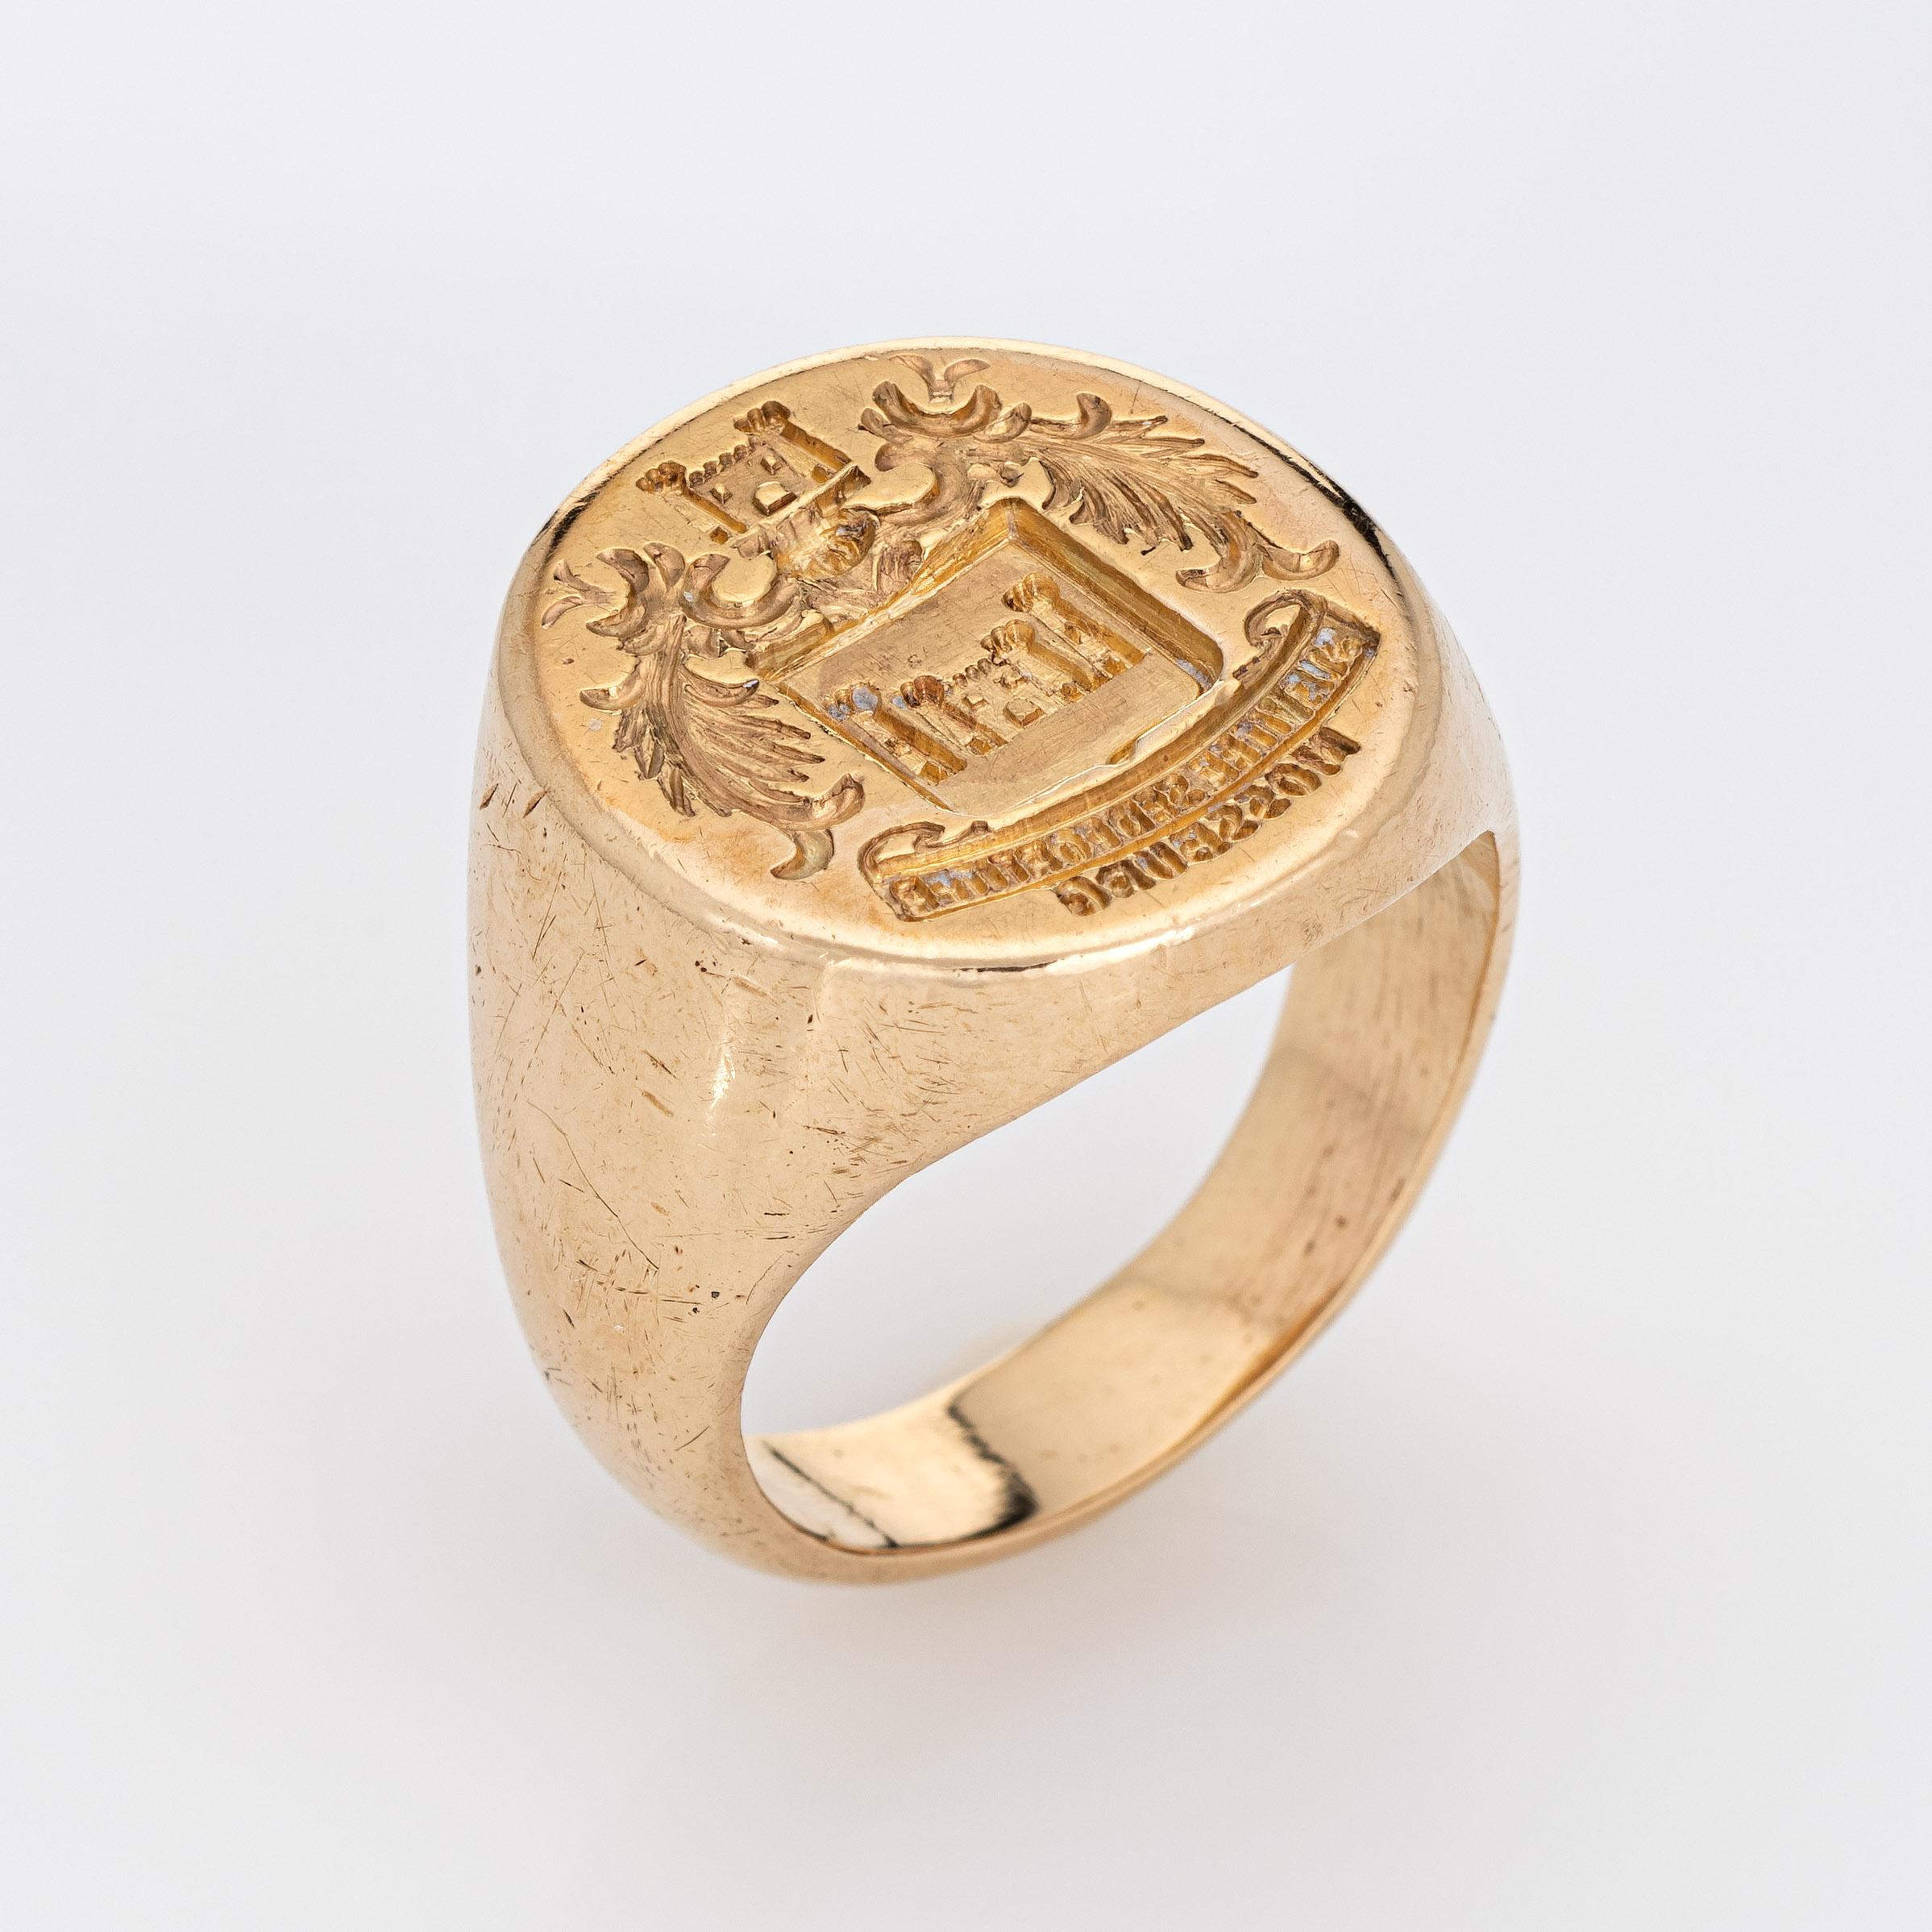 Finely detailed vintage Art Deco era family crest signet ring (circa 1920s to 1930s) crafted in 14 karat yellow gold. 

The signet ring weighs a hefty 18.7 grams. The signet mount features a castle framed with wreaths to the sides. The base of the